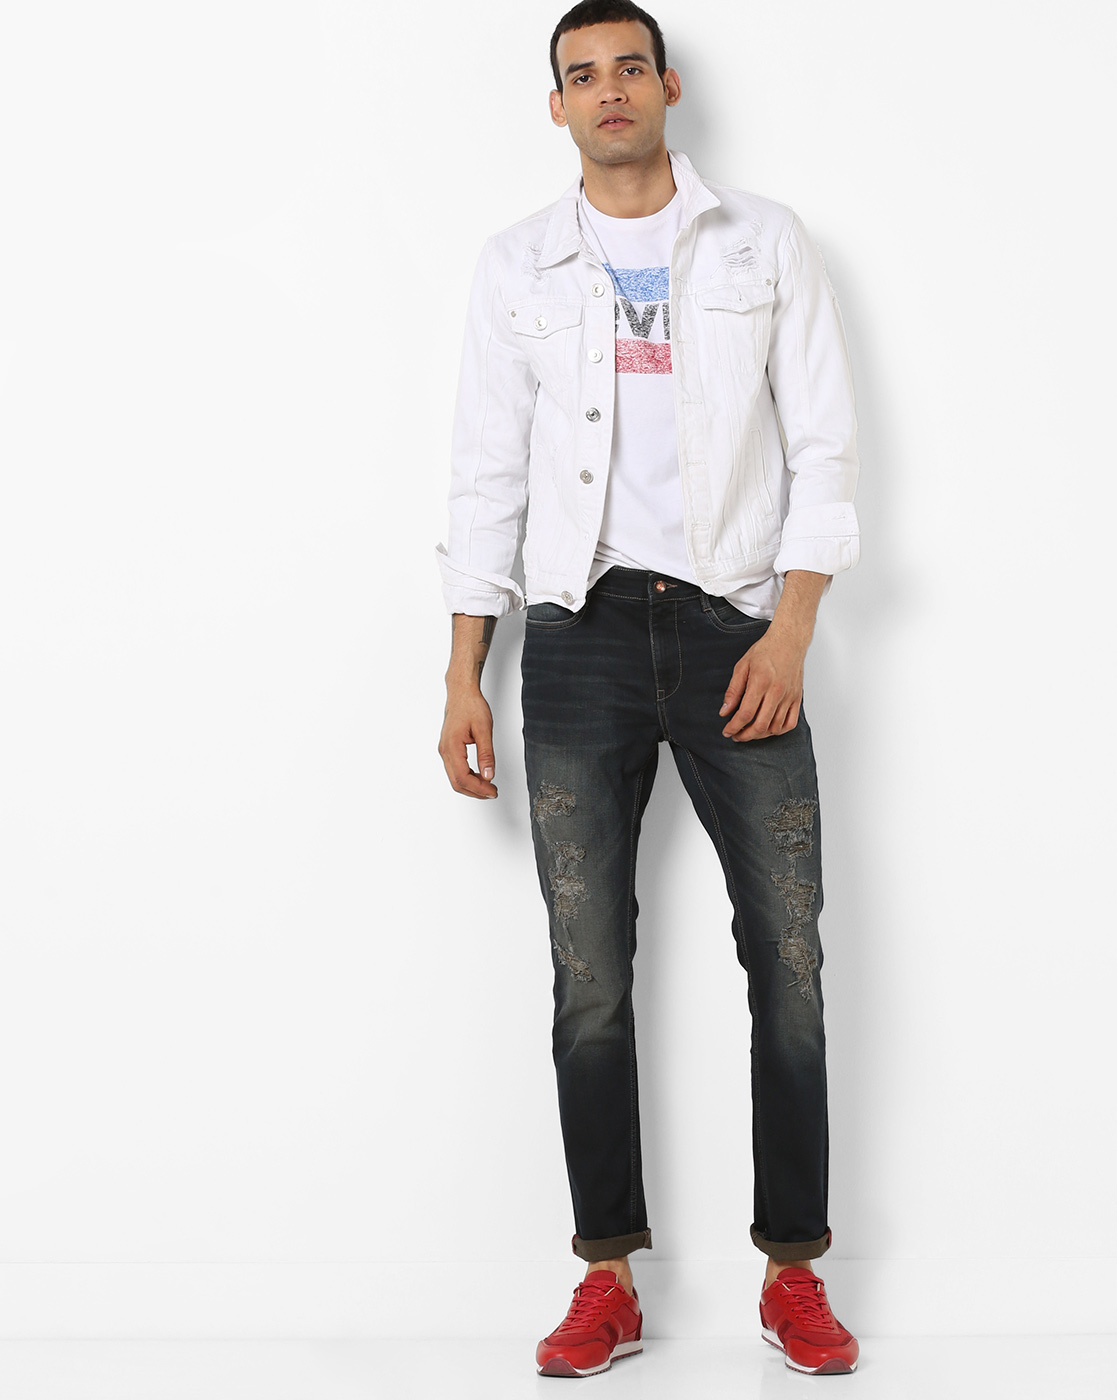 AJIO- Get upto 50% off on Jeans & Trousers